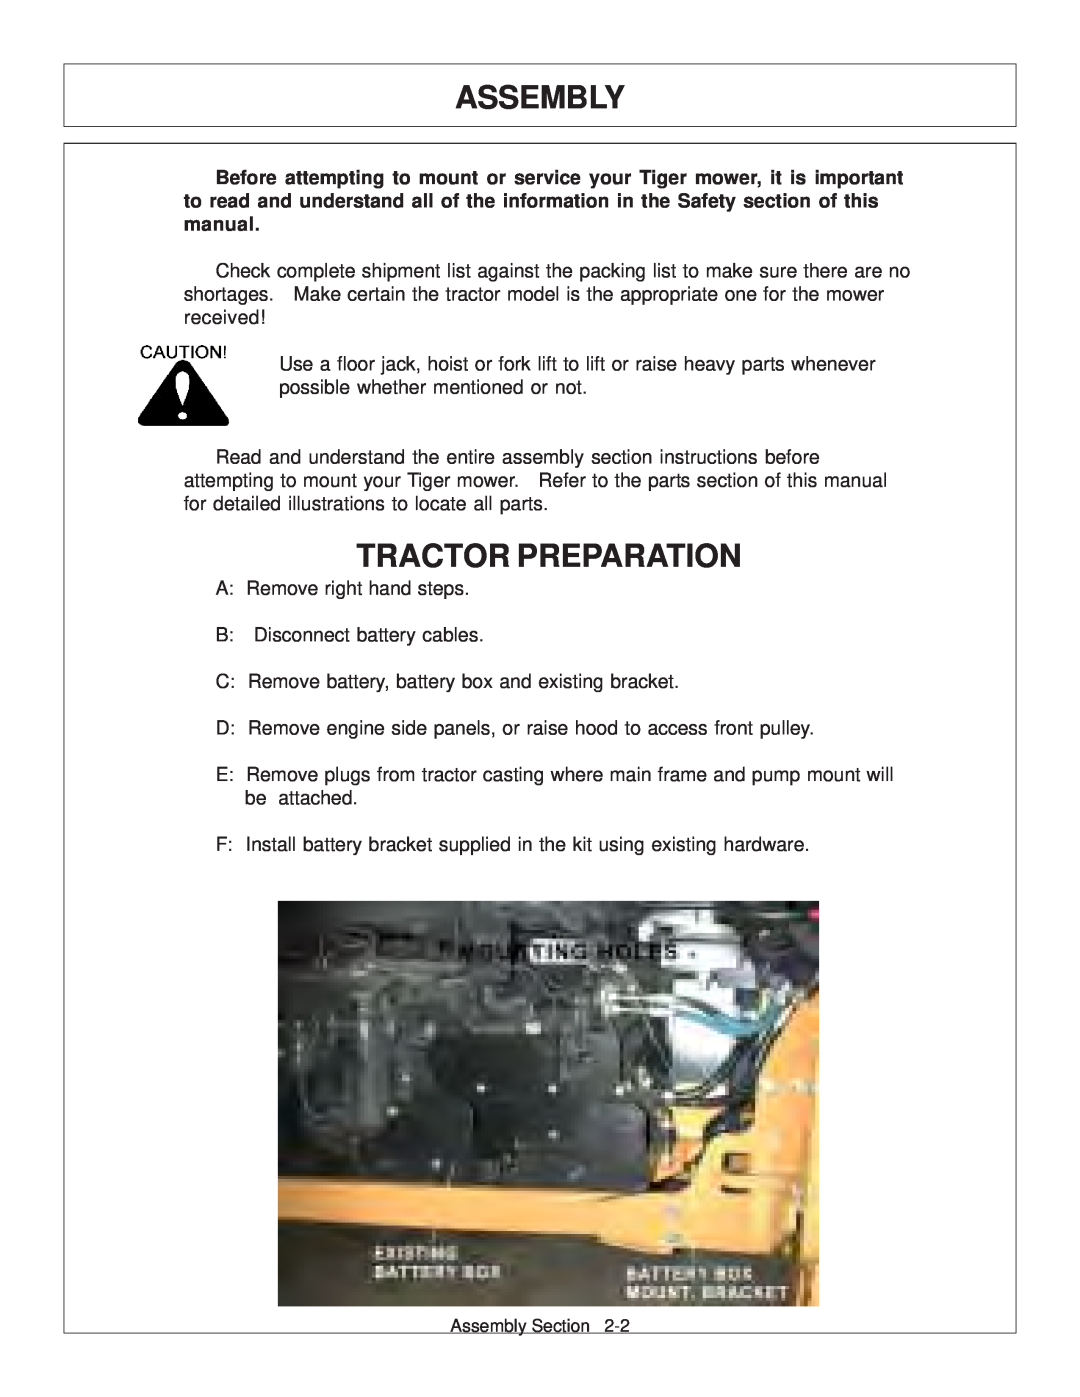 Tiger Products Co., Ltd 6020009 manual Assembly, Tractor Preparation 